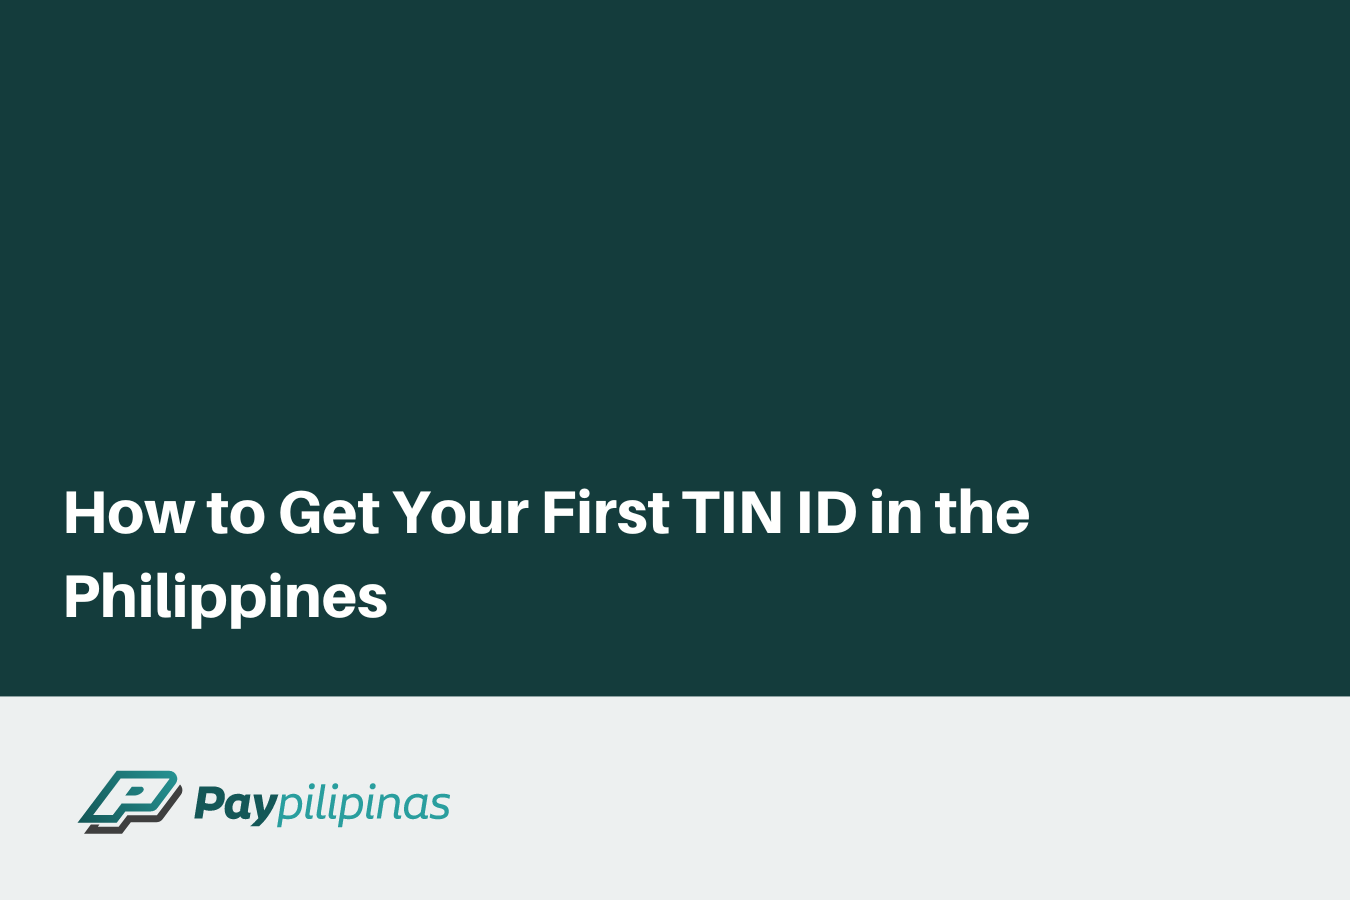 How to Get Your First TIN ID in the Philippines